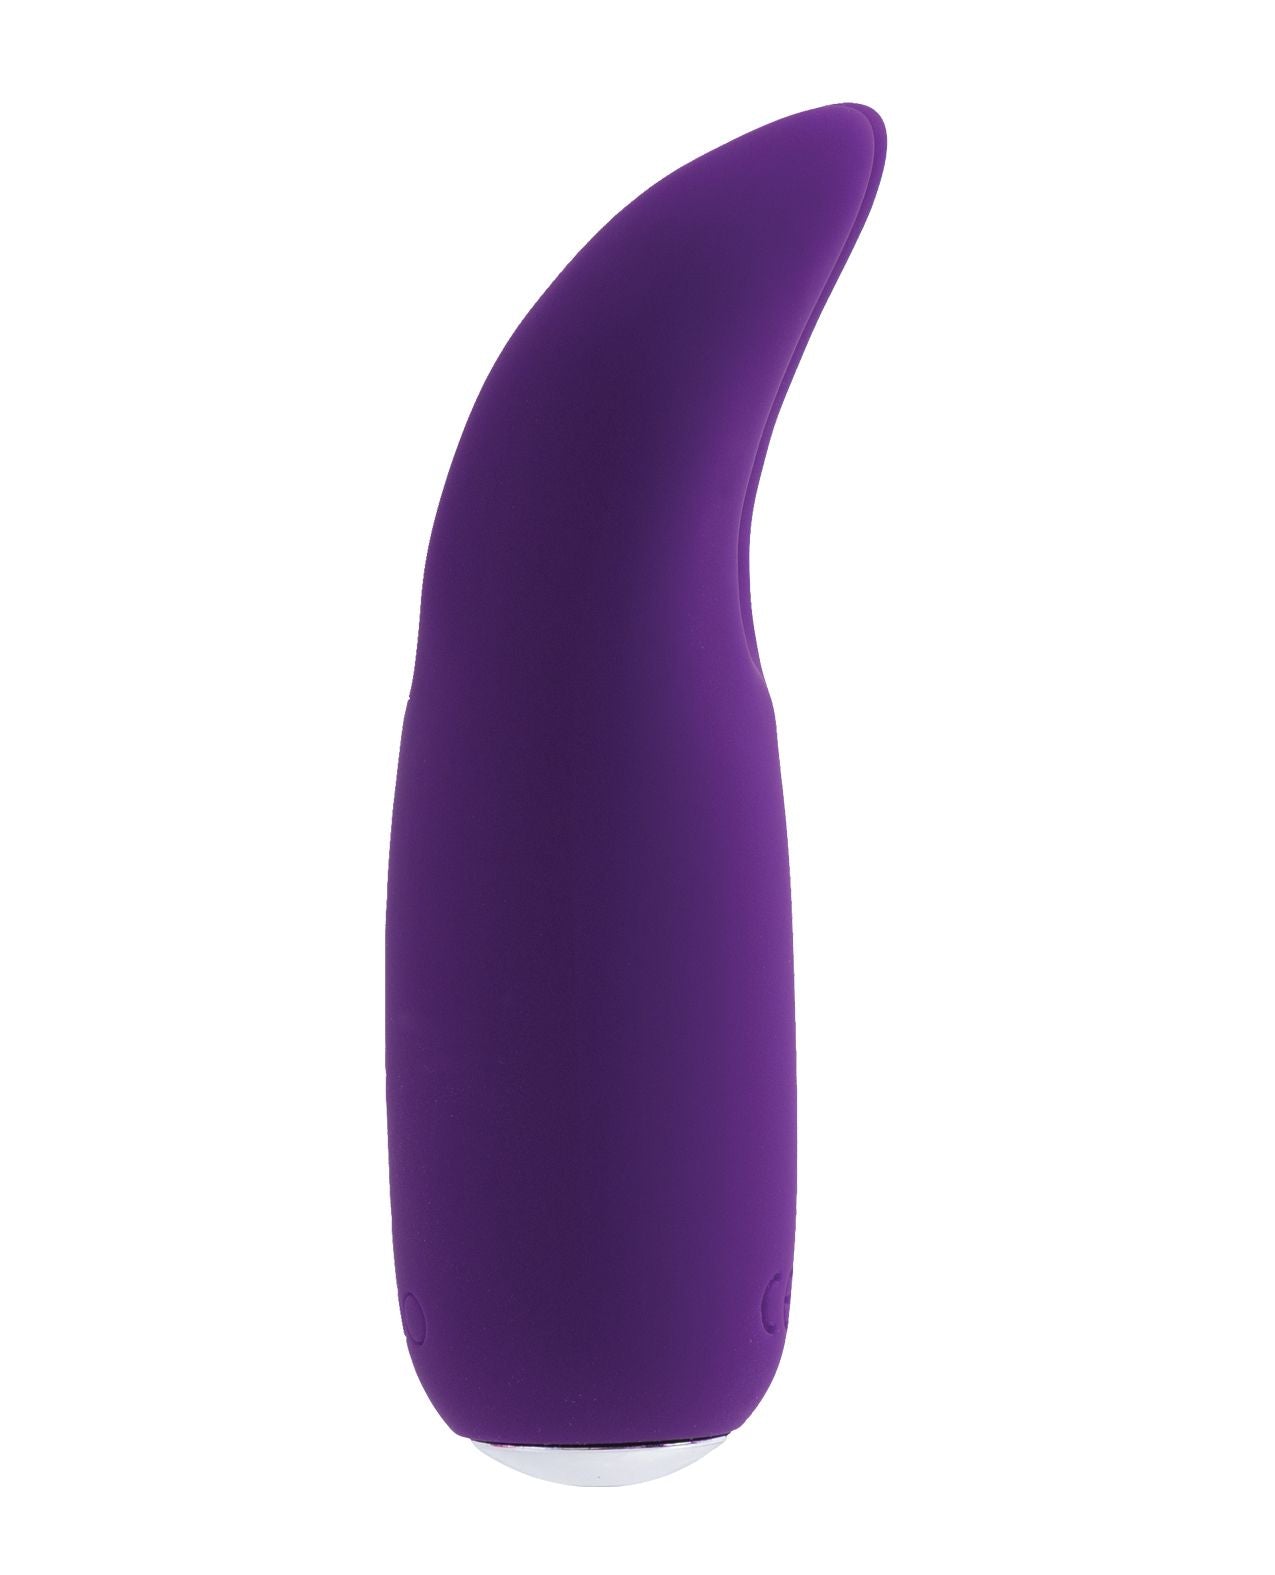 Side view of the dual stim showing its unique shape and narrow tip for pin point stimulation (purple).